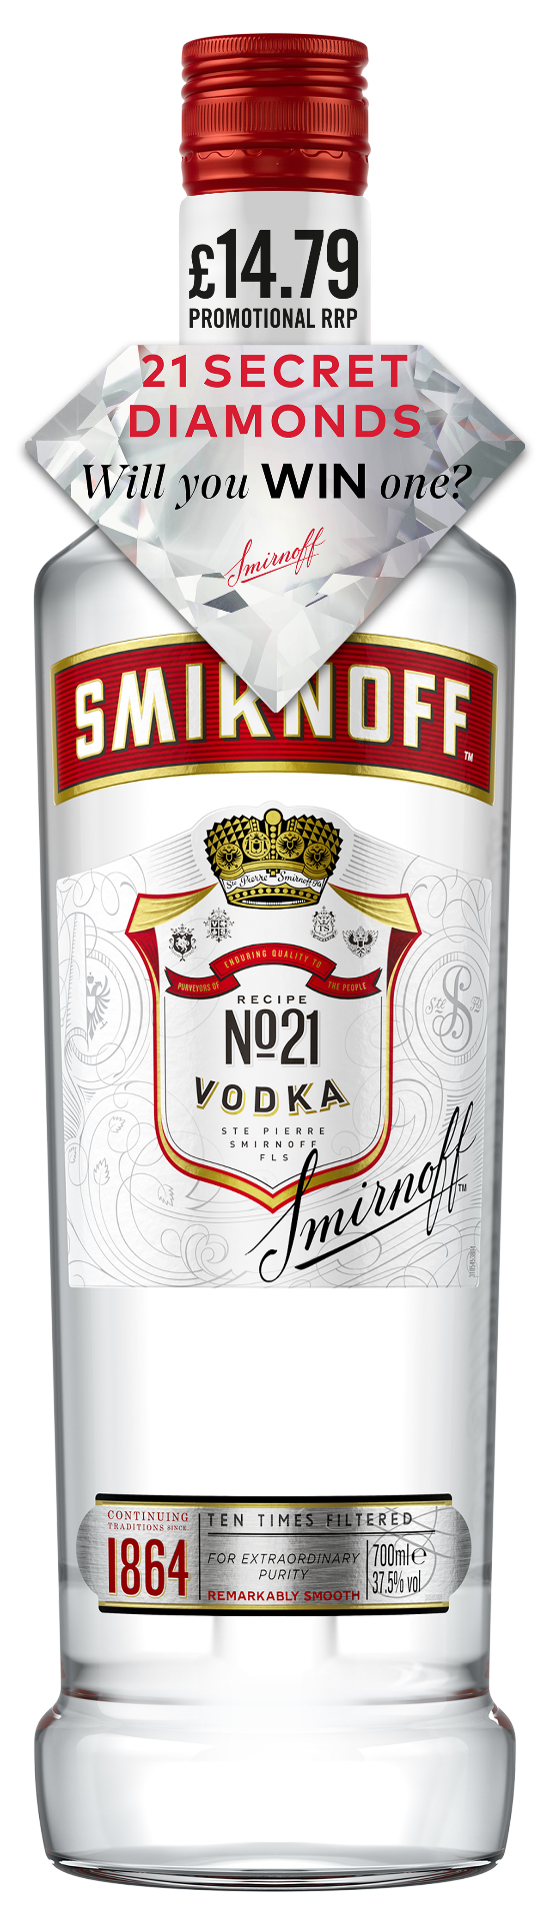 Smirnoff launches diamond giveaway campaign